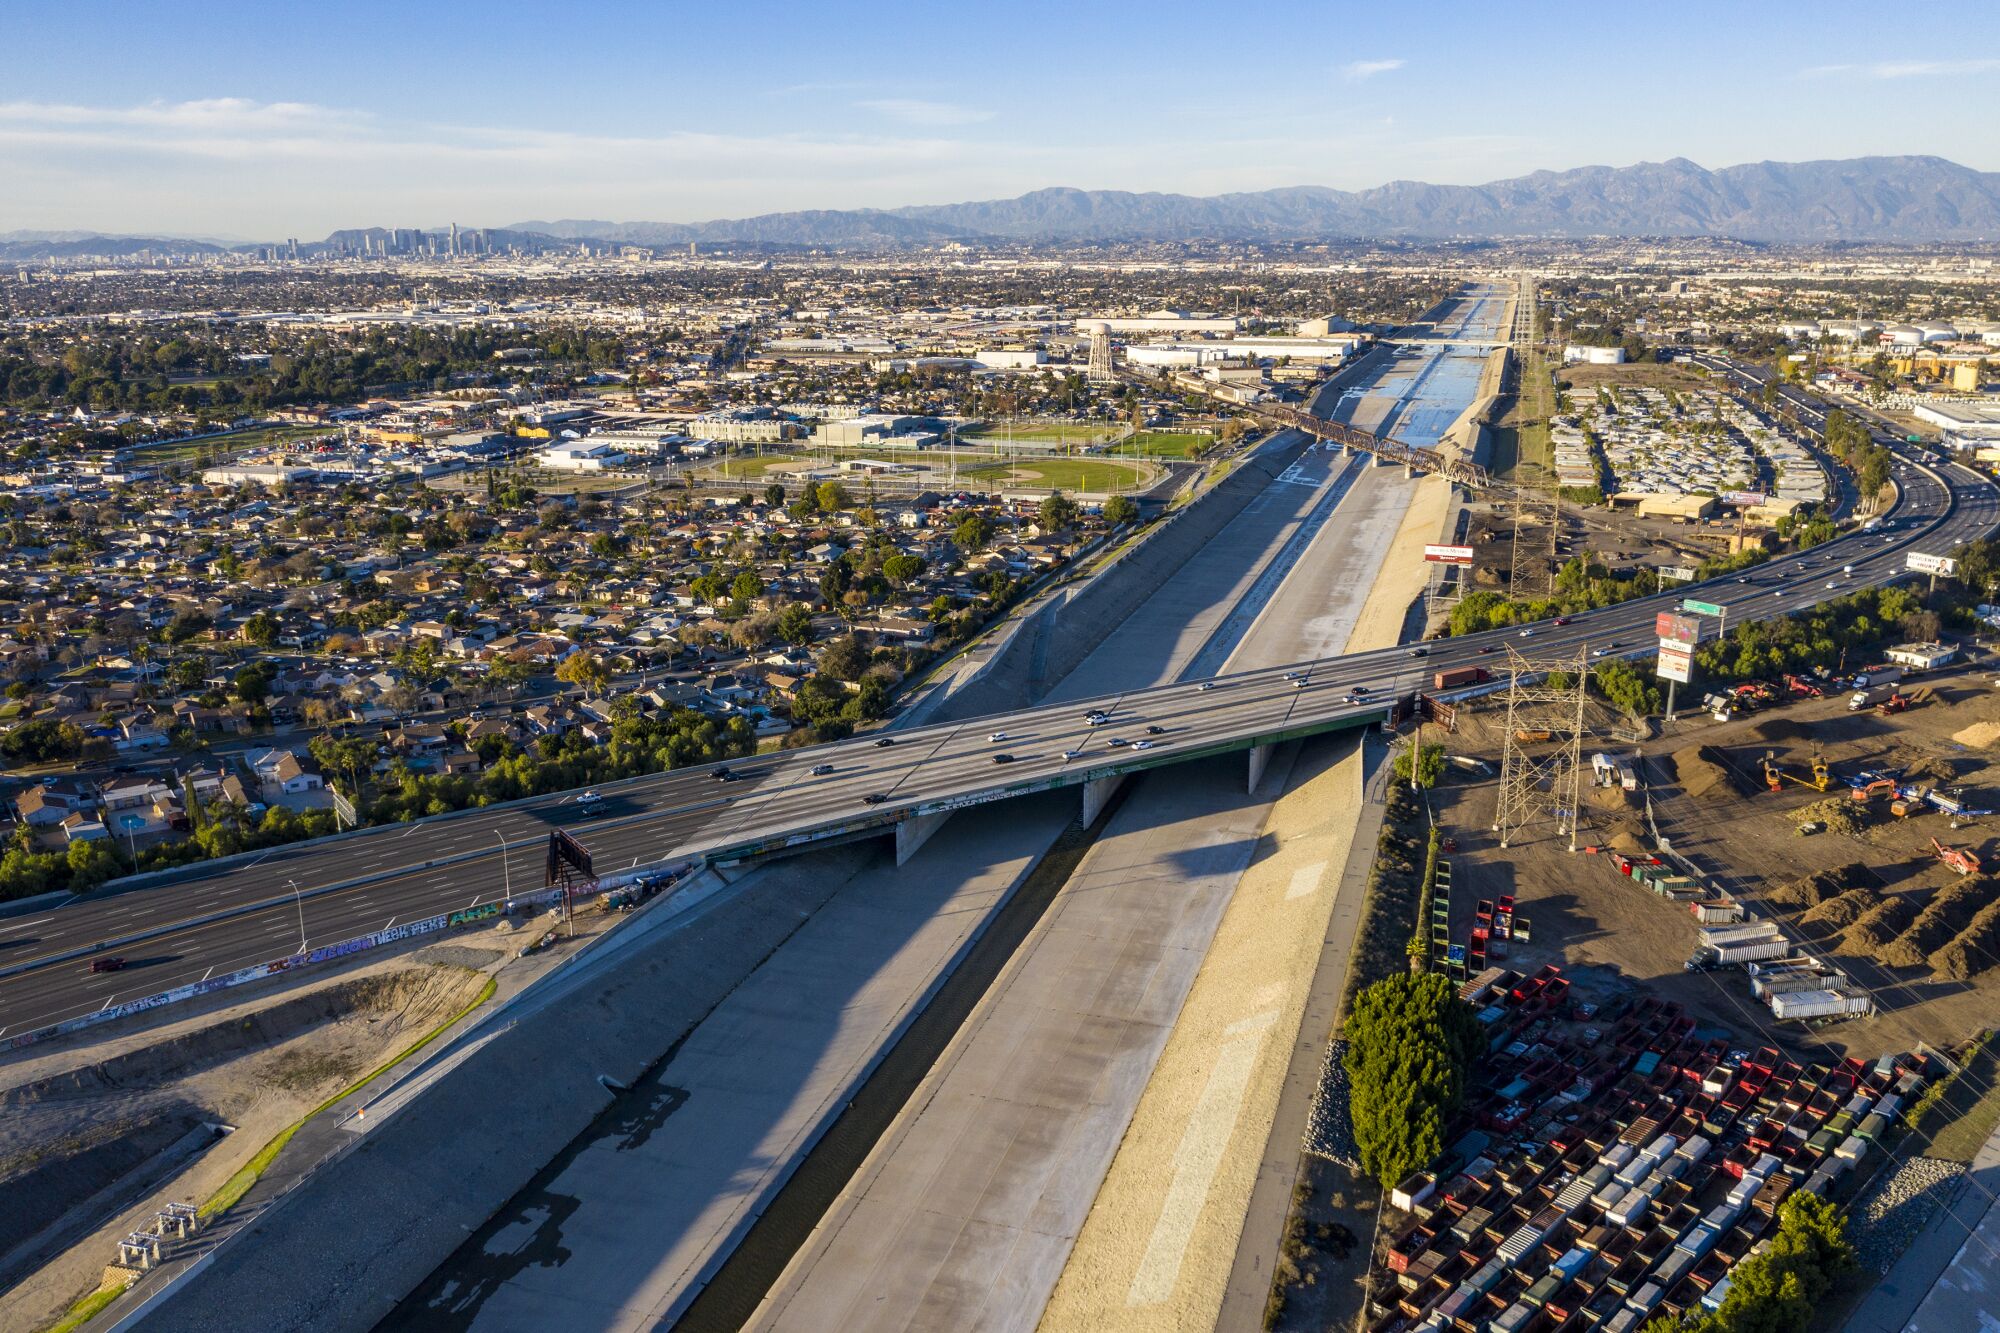 A view looking  north towards a proposed Los Angeles River Platform Park